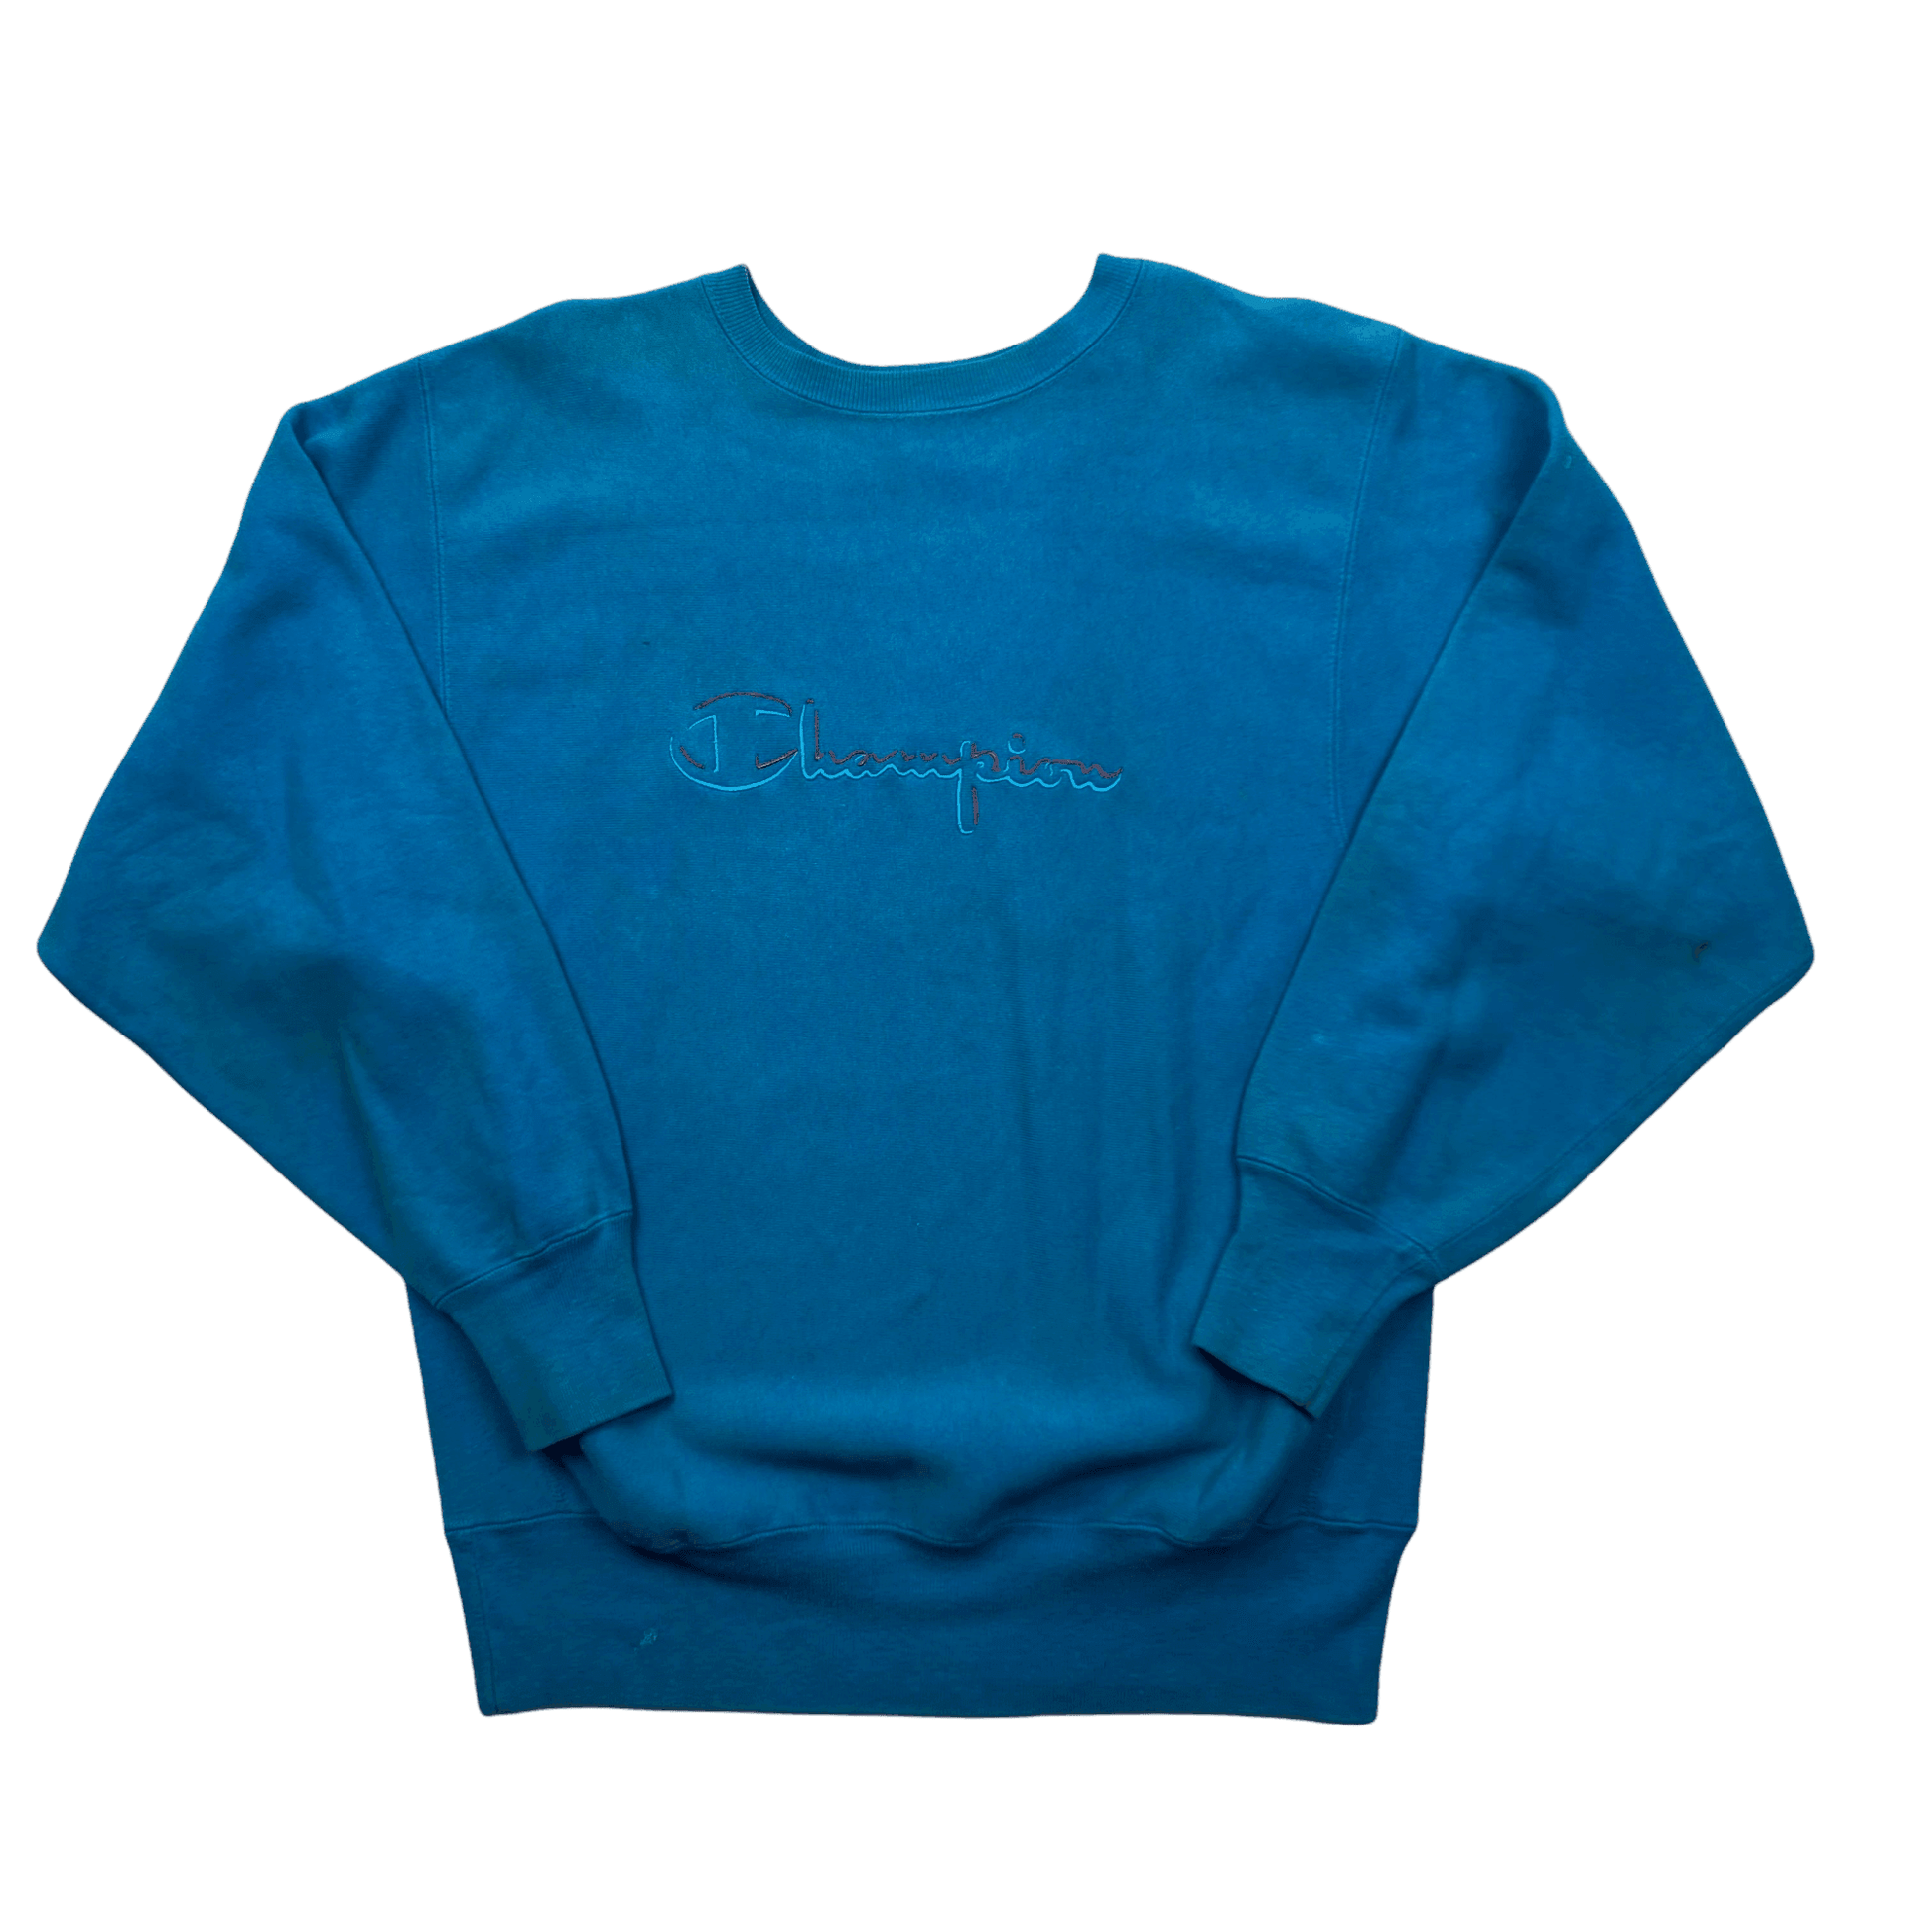 Vintage 90s Blue Champion Reverse Weave Spell-Out Sweatshirt - Extra Large - The Streetwear Studio